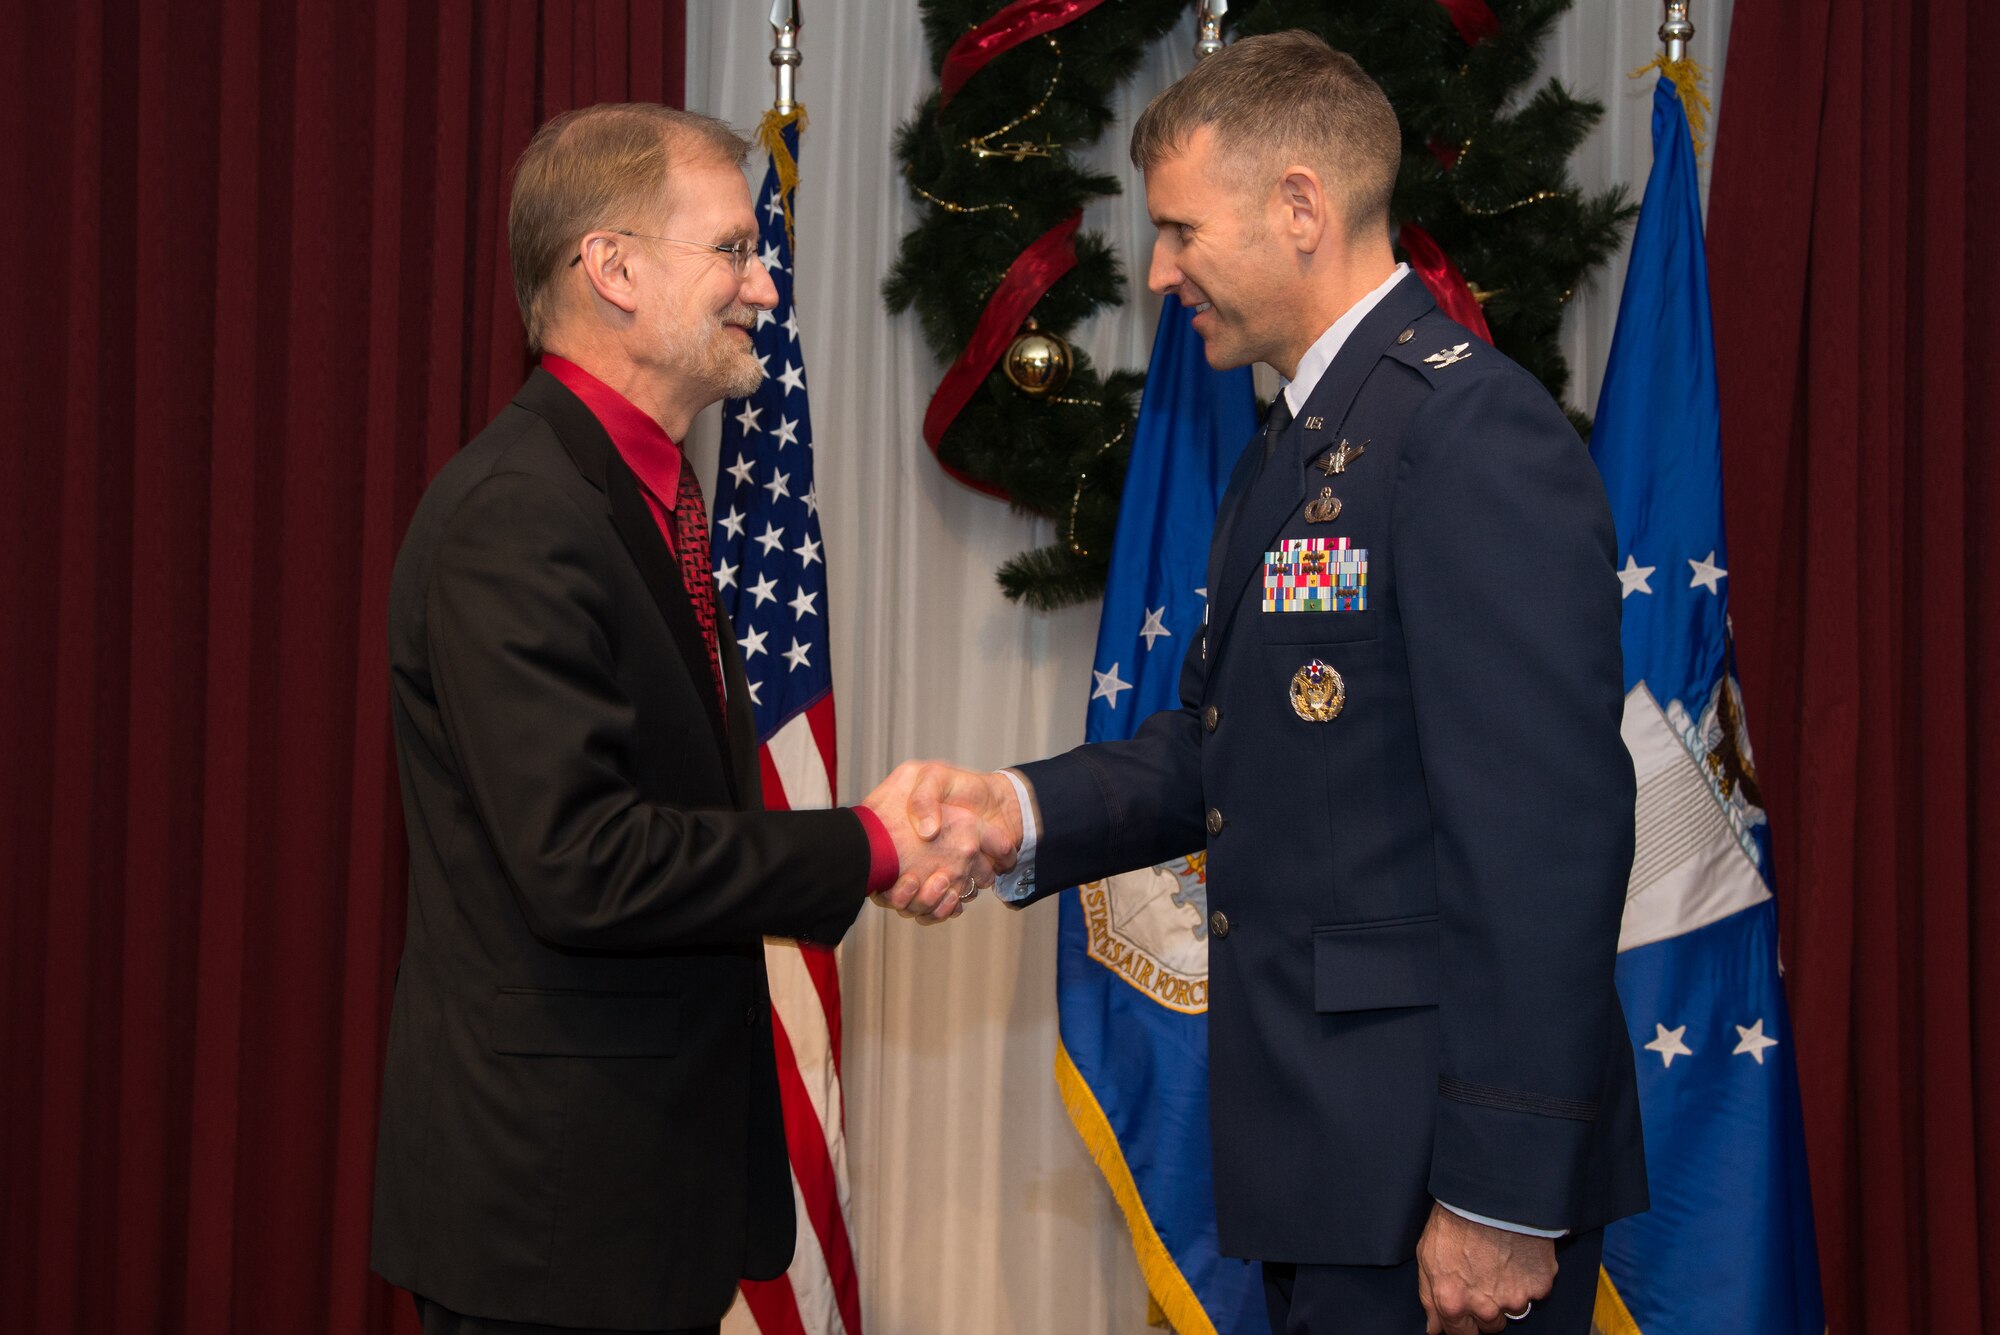 Steven Wert, Battle Management program executive officer, shakes hands with U.S. Air Force Col. David Learned, the first JSTARS Recapitalization Division senior materiel leader, during the JSTARS Recap Division stand-up ceremony at Hanscom AFB, Mass., Dec. 5, 2014. The Recap, which is the service's fourth largetst acquisition priority, is focused on replacing the aging fleet of E-8C aircraft that is used to detect tarets at long distances. The program's size and significance has grown resulting in its own Battle Management division at Hanscom. (U.S. Air Force photo by Mark Herlihy)